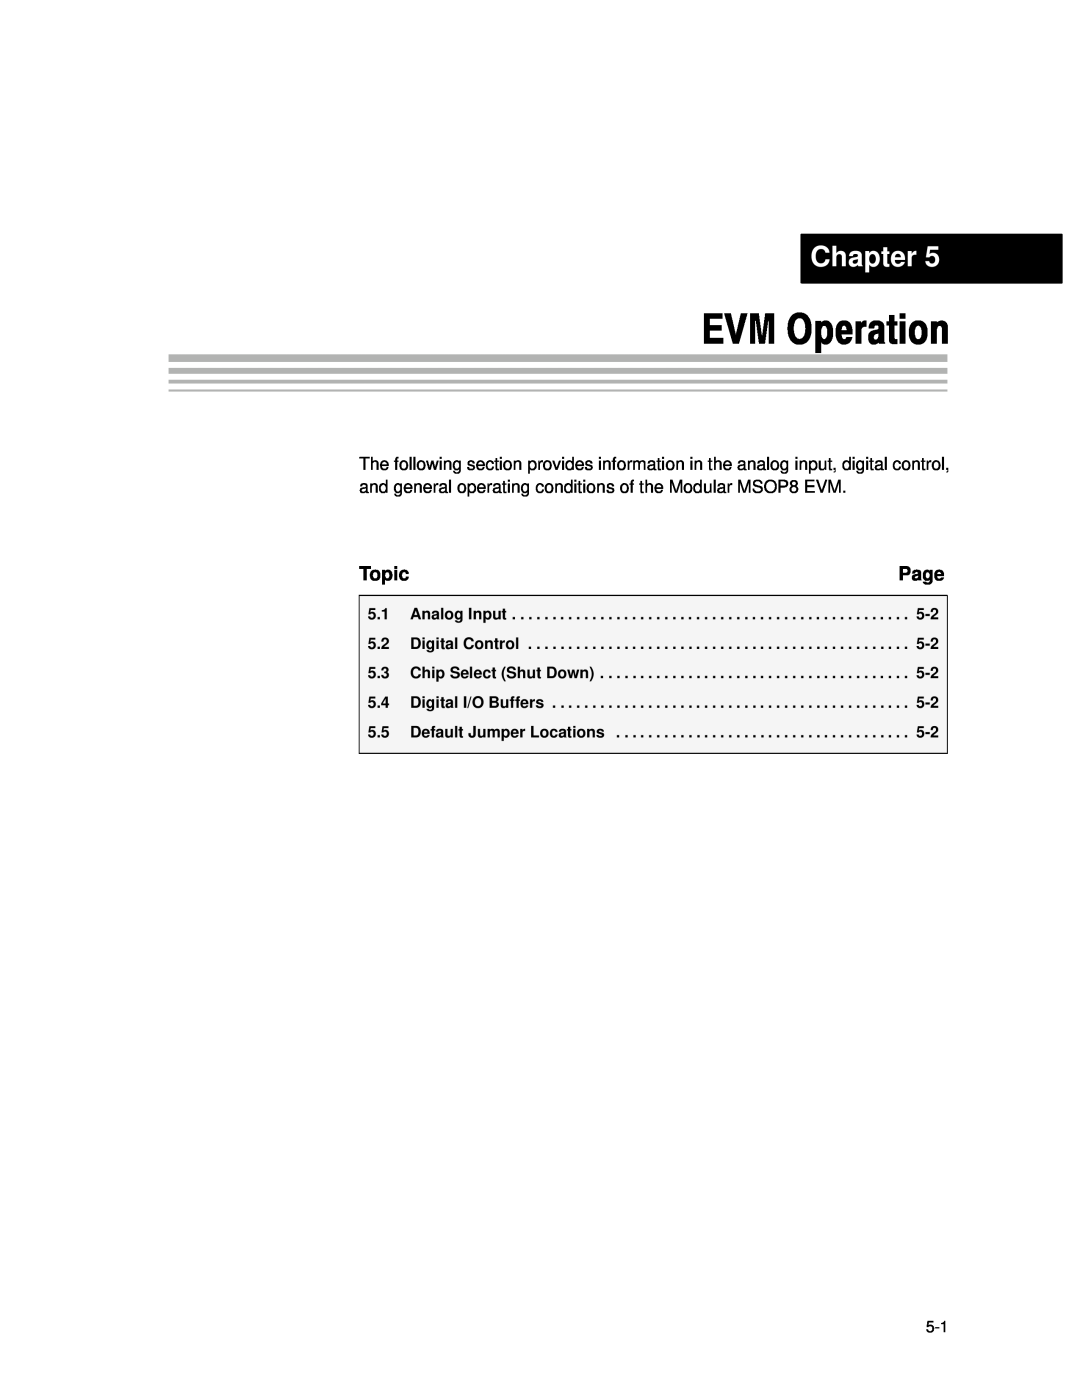 Texas Instruments MSOP8 manual EVM Operation, Chapter, Page, Topic, Analog Input, Digital Control, Chip Select Shut Down 